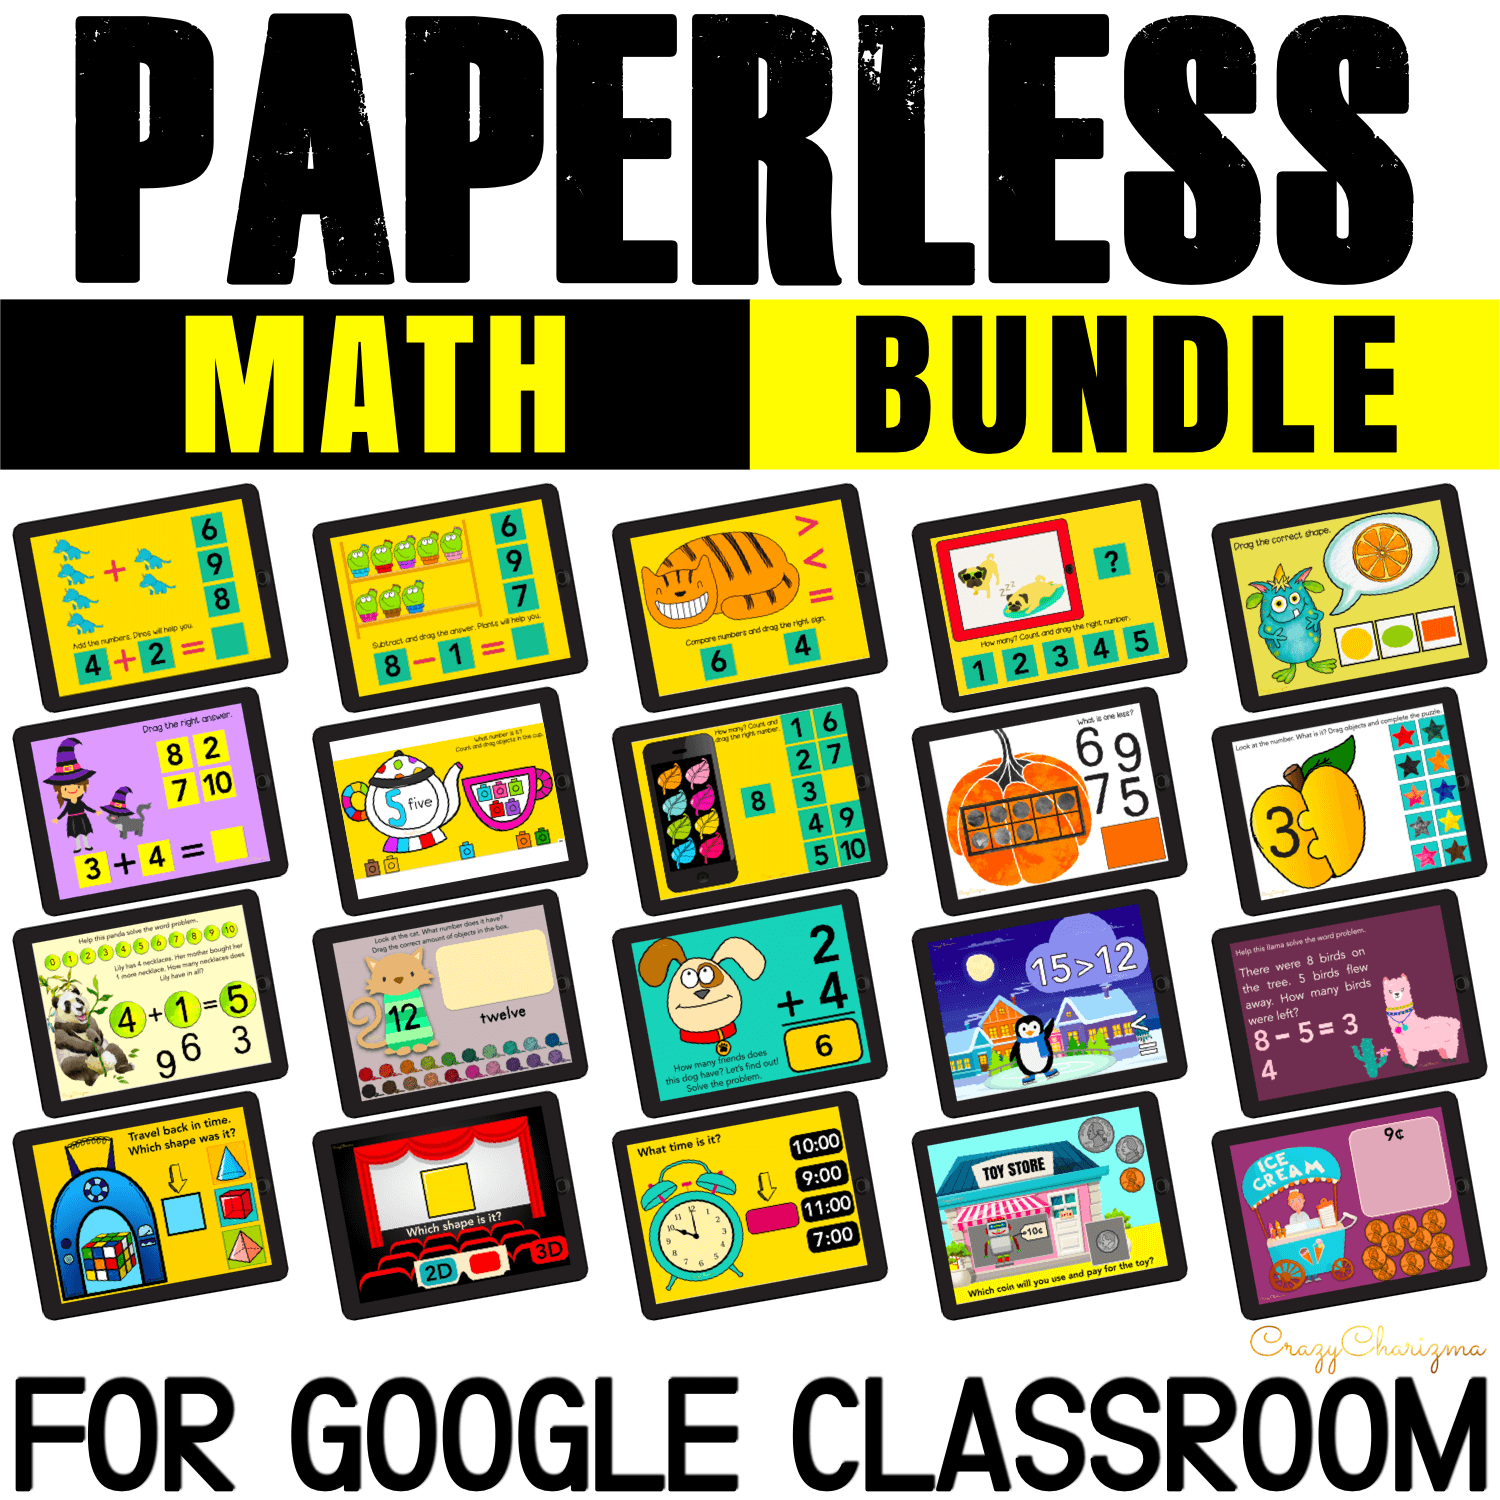 Need engaging digital math games for Google Classroom? Save your time and prep - get interactive slides to practice kindergarten math. Perfect to use for centers, assessment, independent practice, early finishers, homework, group work, as well as during distance learning or hybrid.